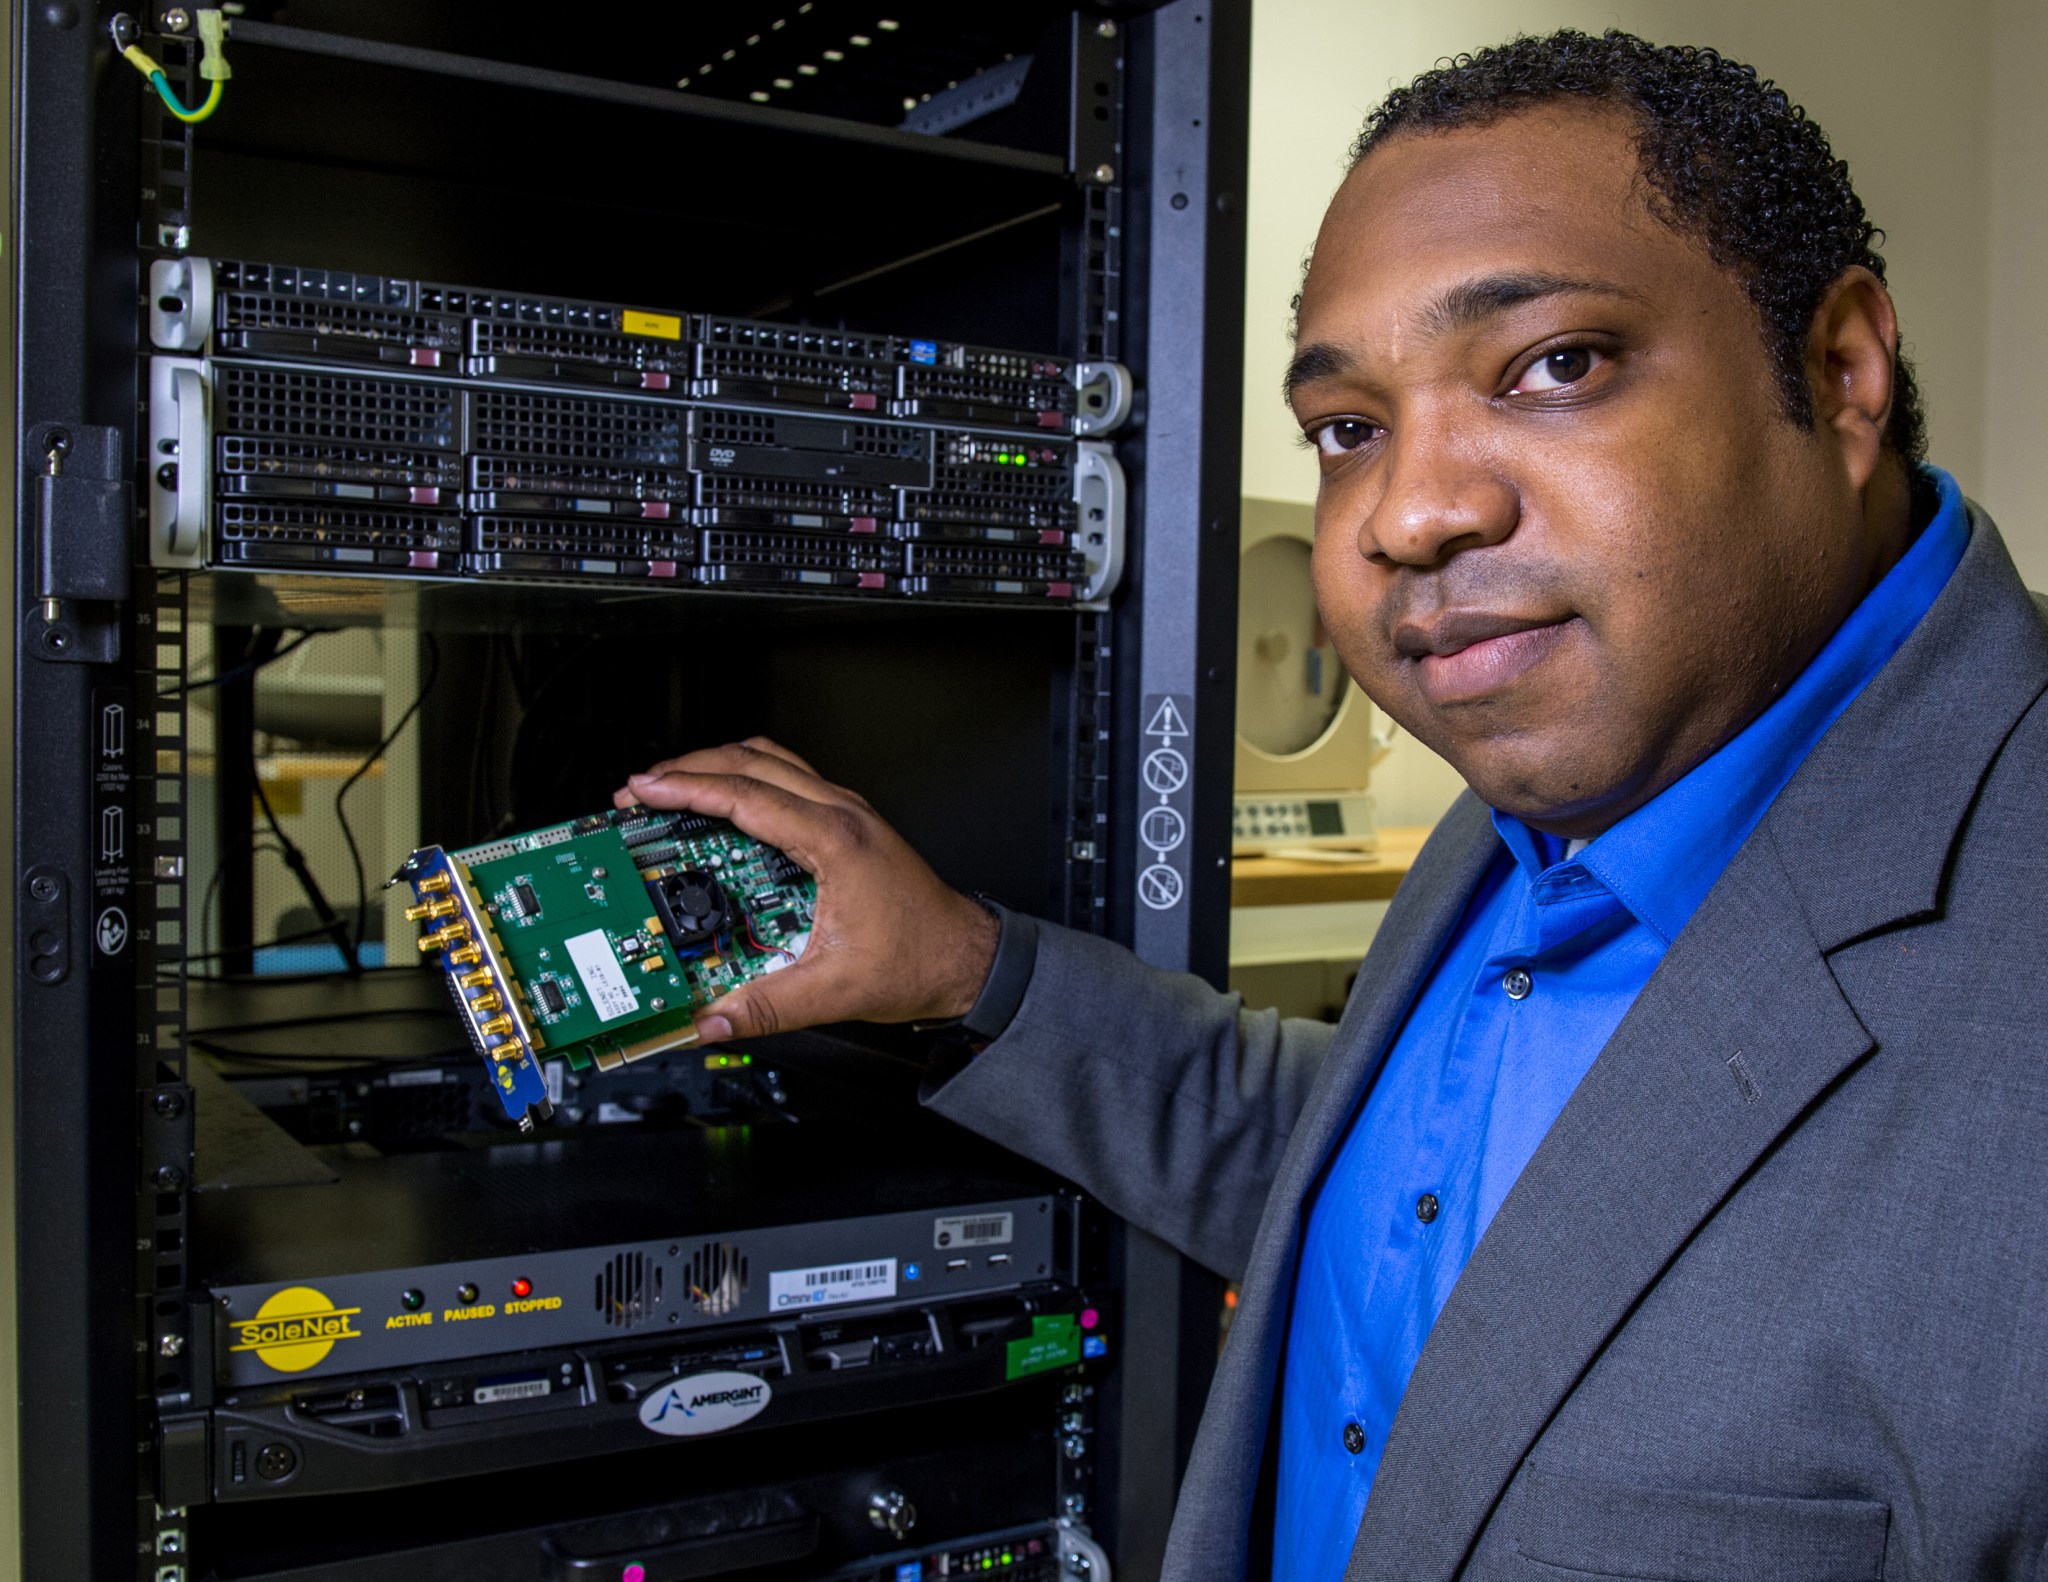 Philip Baldwin holds the custom-designed high-speed interface card. It looks like a green circuit board about the size of a hand. He is turned slightly, looking at the camera over his shoulder.